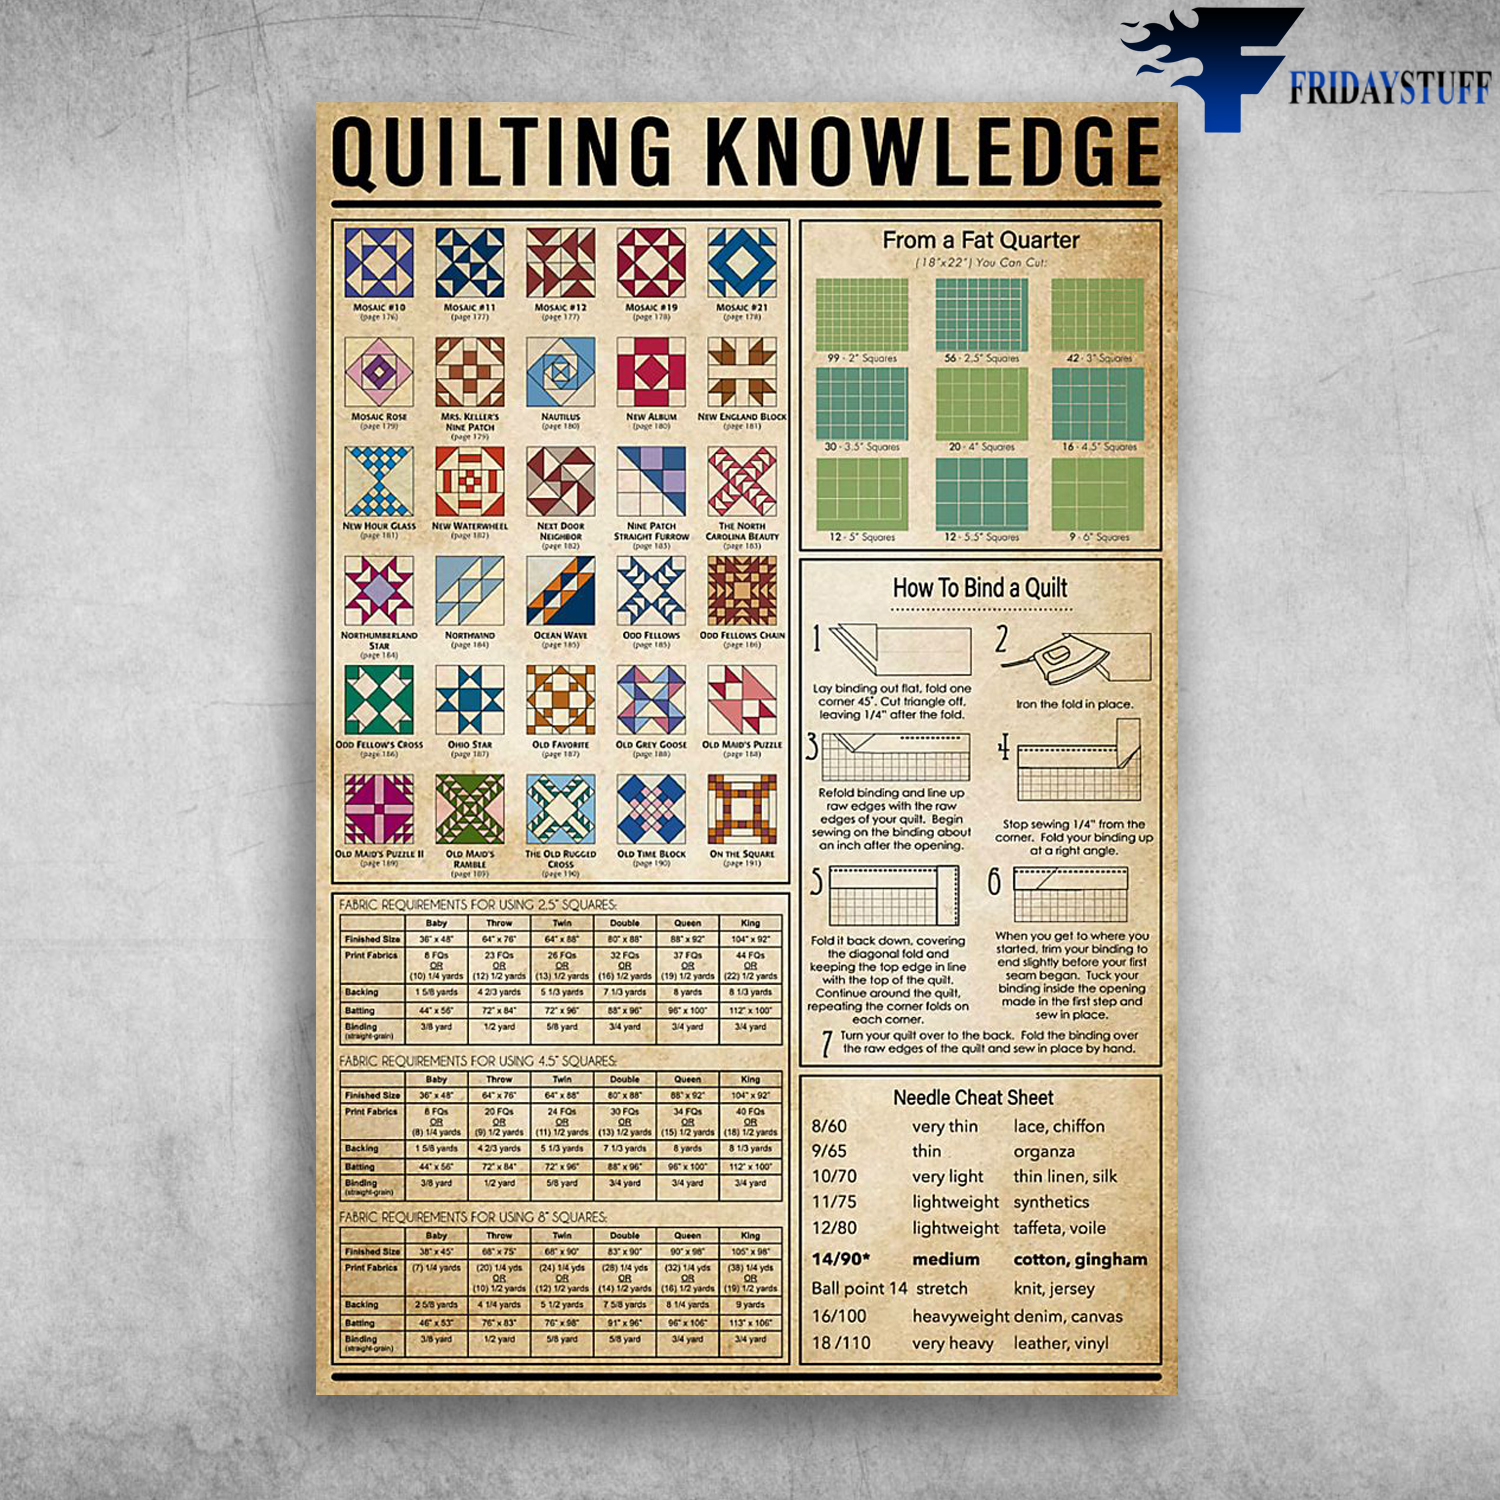 Quilting Knowledge How To Bind A Quilt From A Fat Quarter